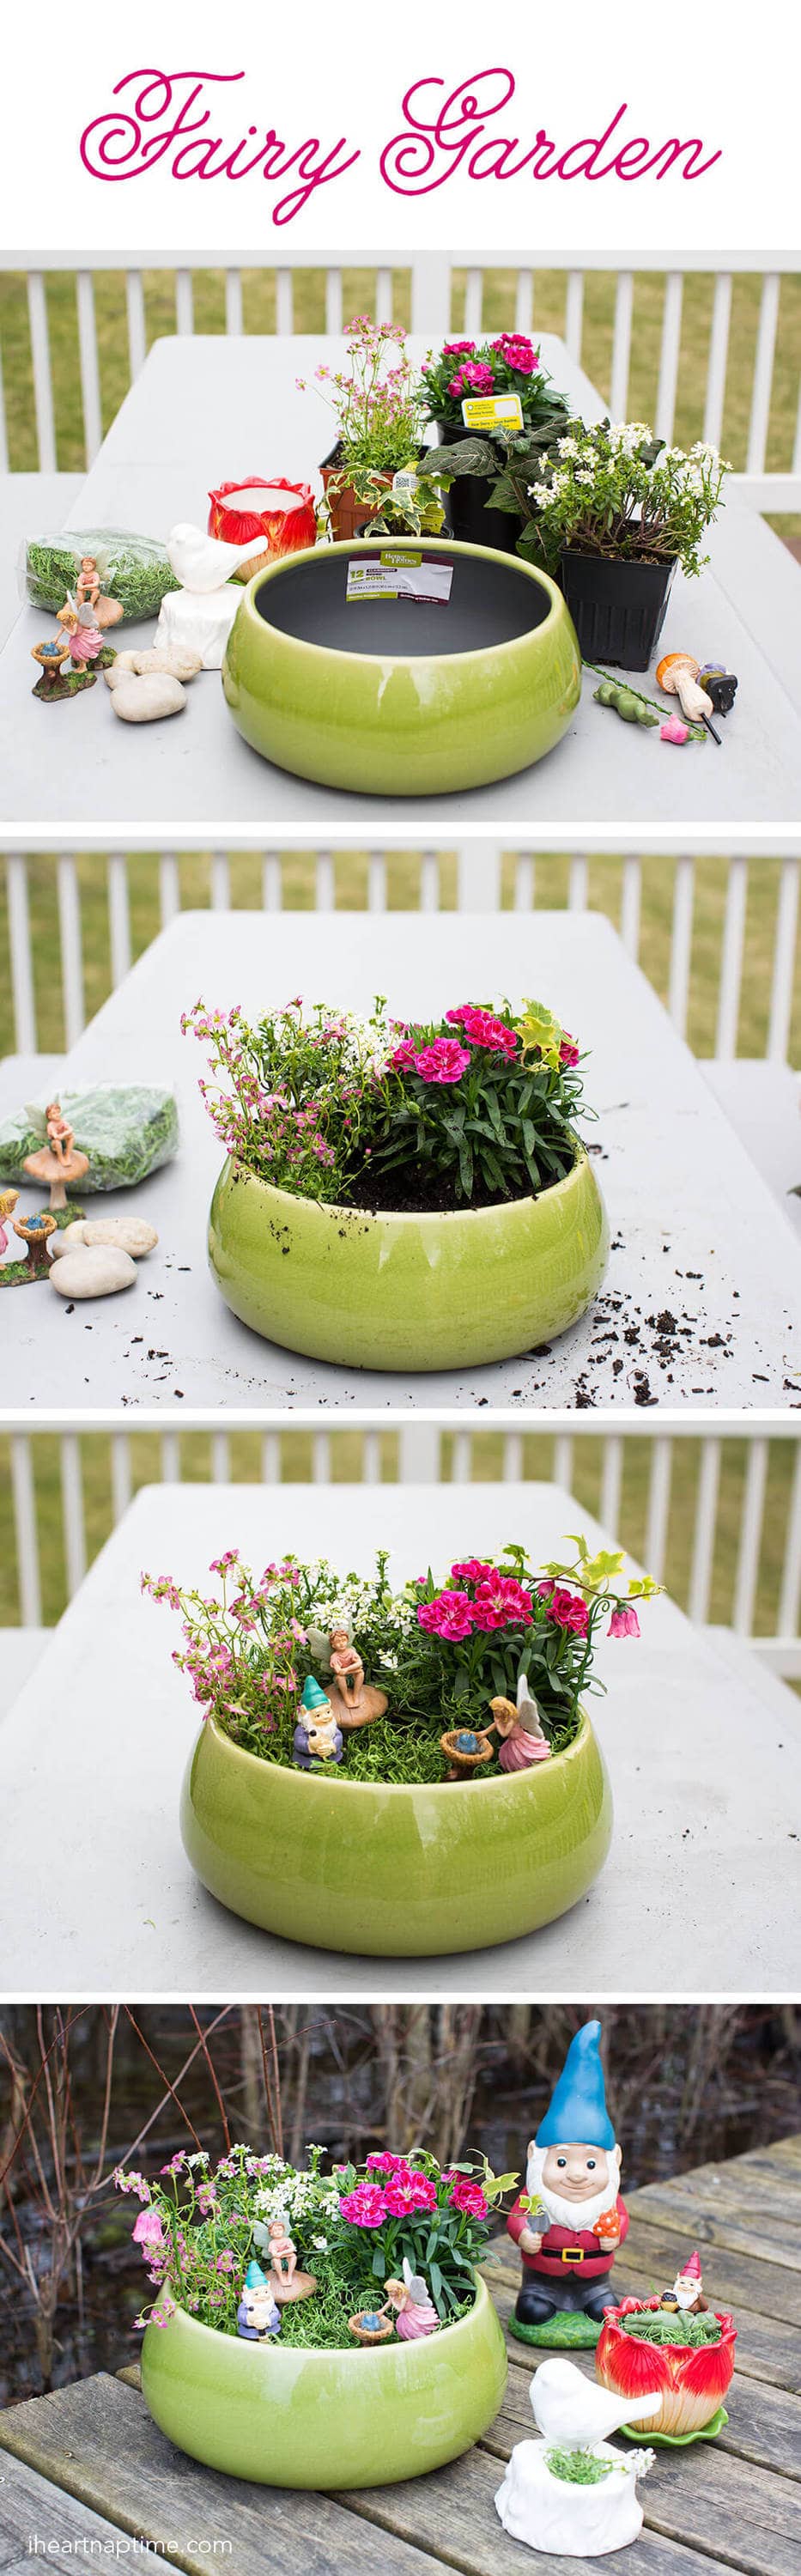 DIY Planter Fairy Garden - for indoor or outdoor use that the kids can help create! Such a fun way to add a little magic to your yard.